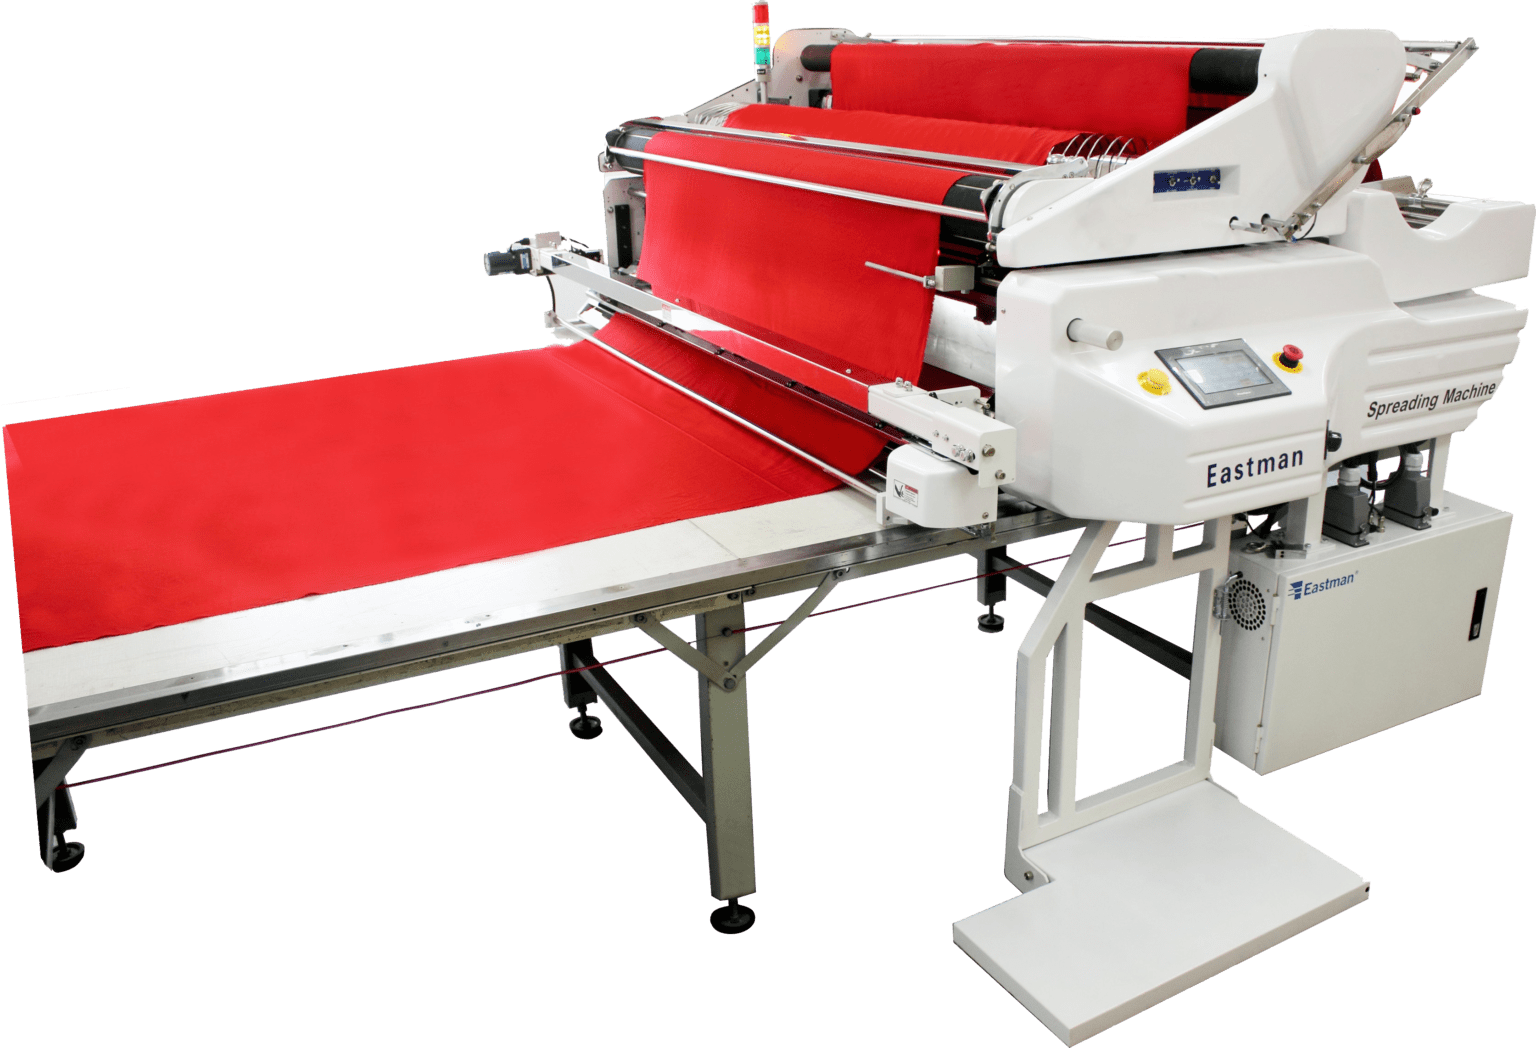 EASTMAN ES-960
The Eastman ES-960 Series Spreading System is suitable for all types of knit material